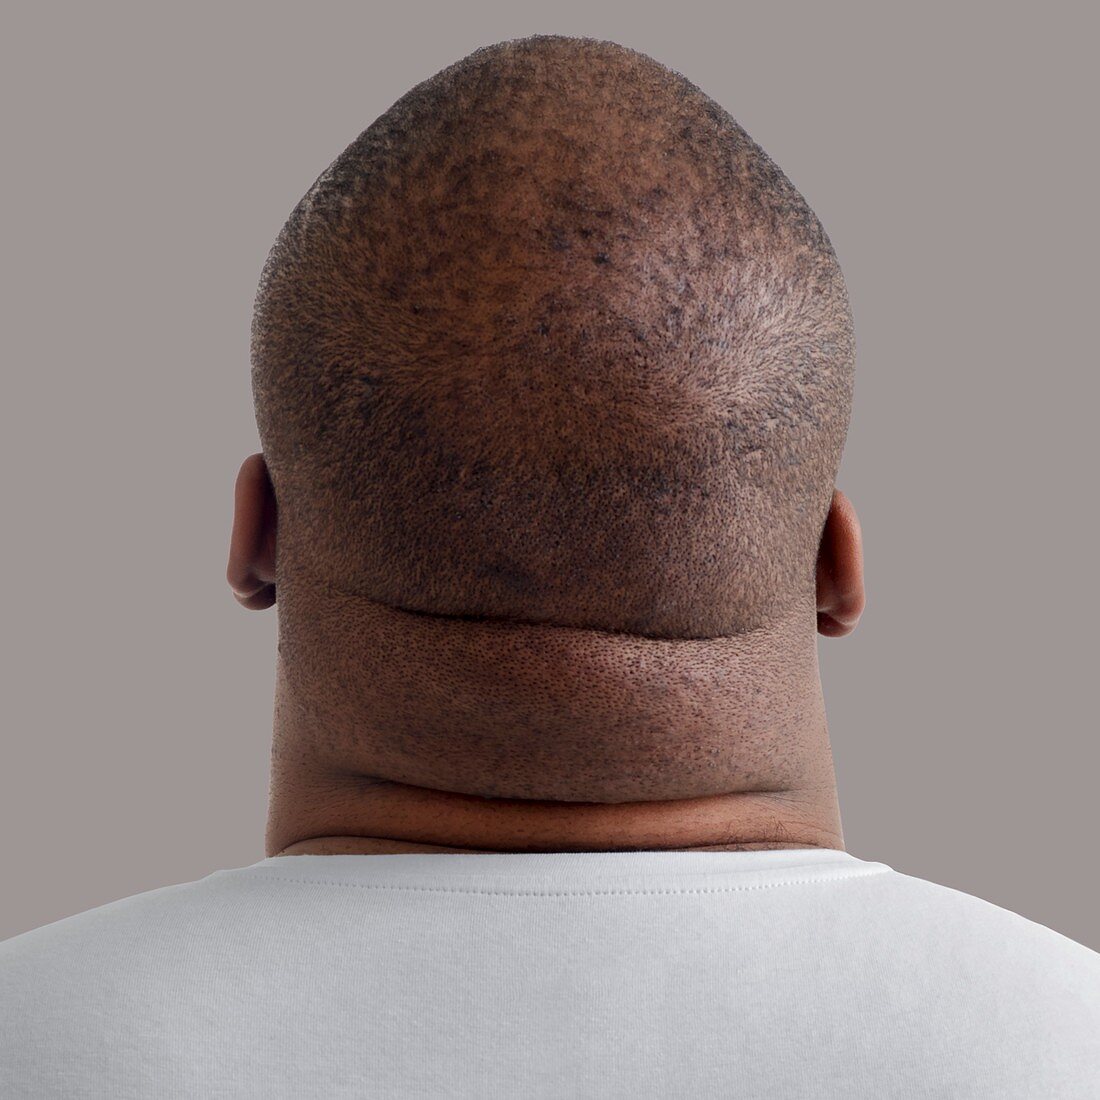 Close up of overweight man's neck